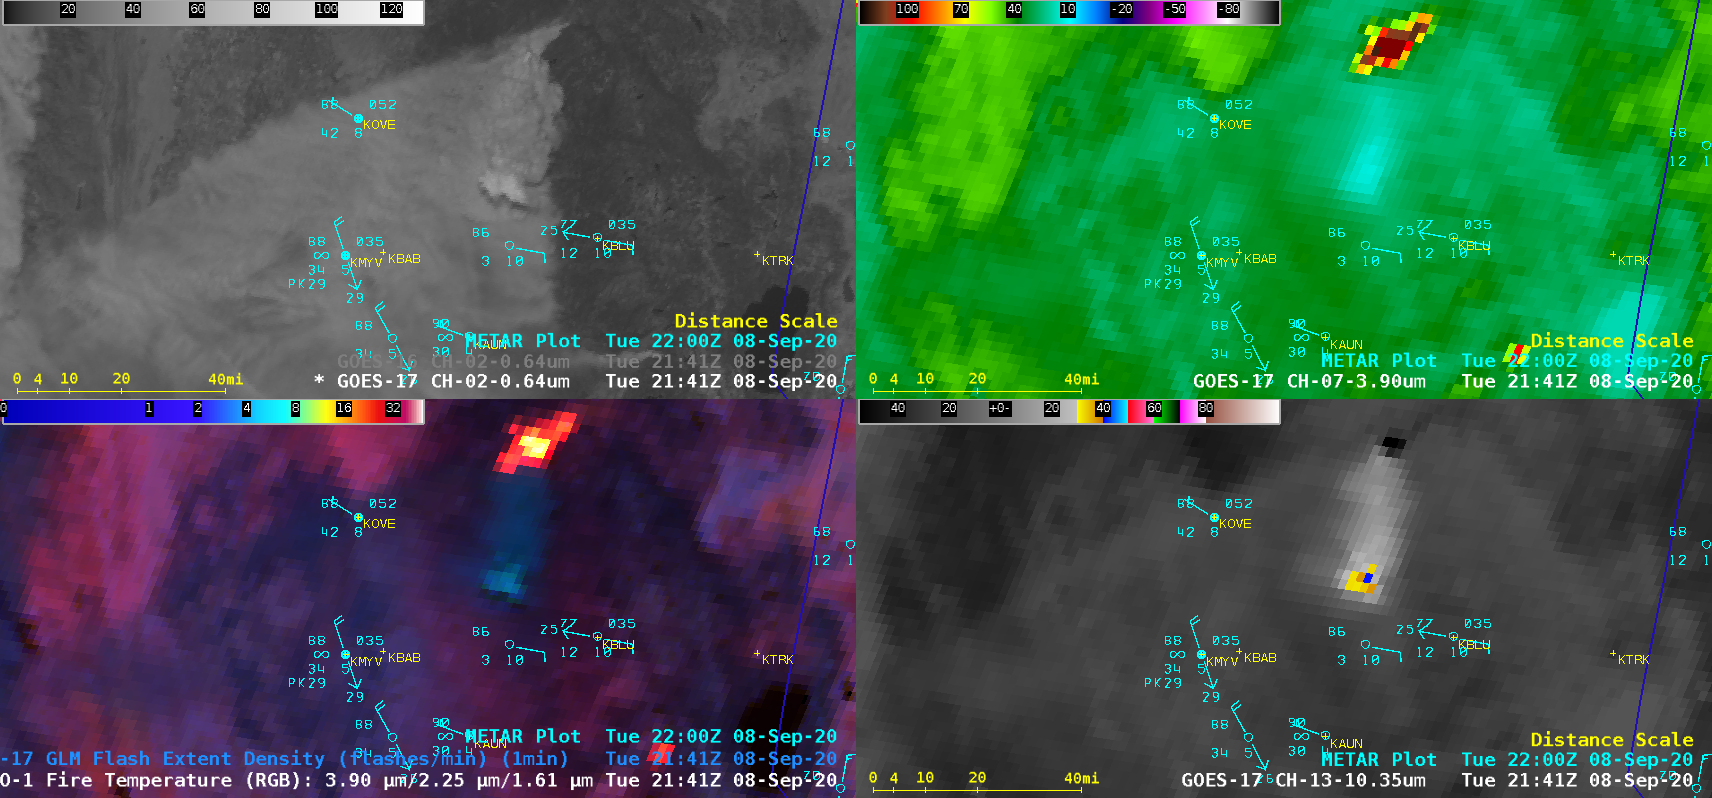 GOES-17 “Red” Visible (0.64 µm, top left), Shortwave Infrared (3.9 µm, top right), Fire Temperature RGB + GLM Flash Extent Density (bottom left) and “Clean” Infrared Window (10.35 µm, bottom right) [click to play animation | MP4]